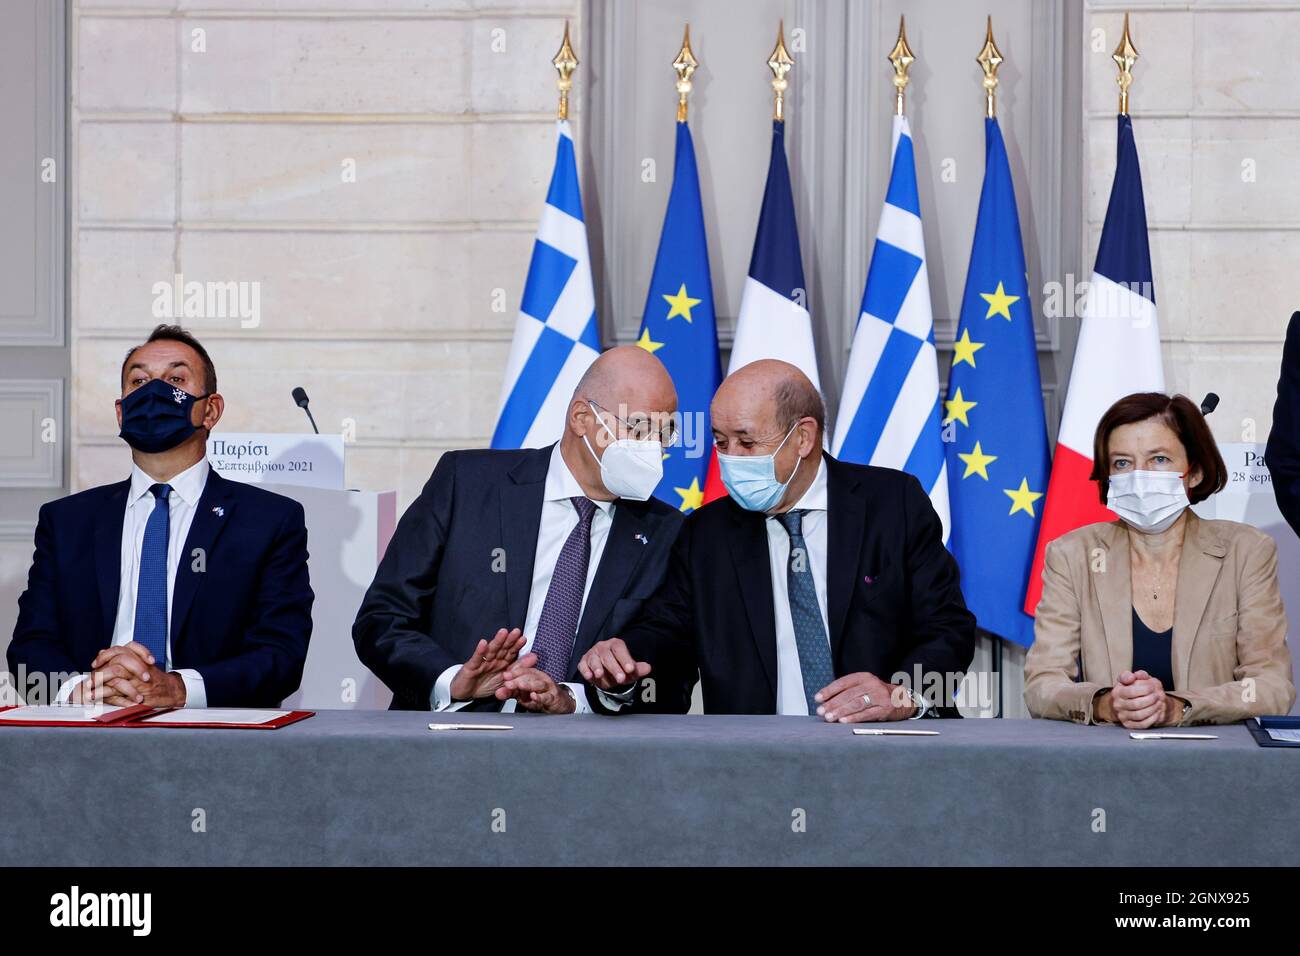 Greek Defence Minister Nikolaos Panagiotopoulos, Greek Foreign Affairs  Minister Nikos Dendias, French Foreign Affairs Minister Jean-Yves Le Drian  and French Defence Minister Florence Parly take part in the signing  ceremony of a